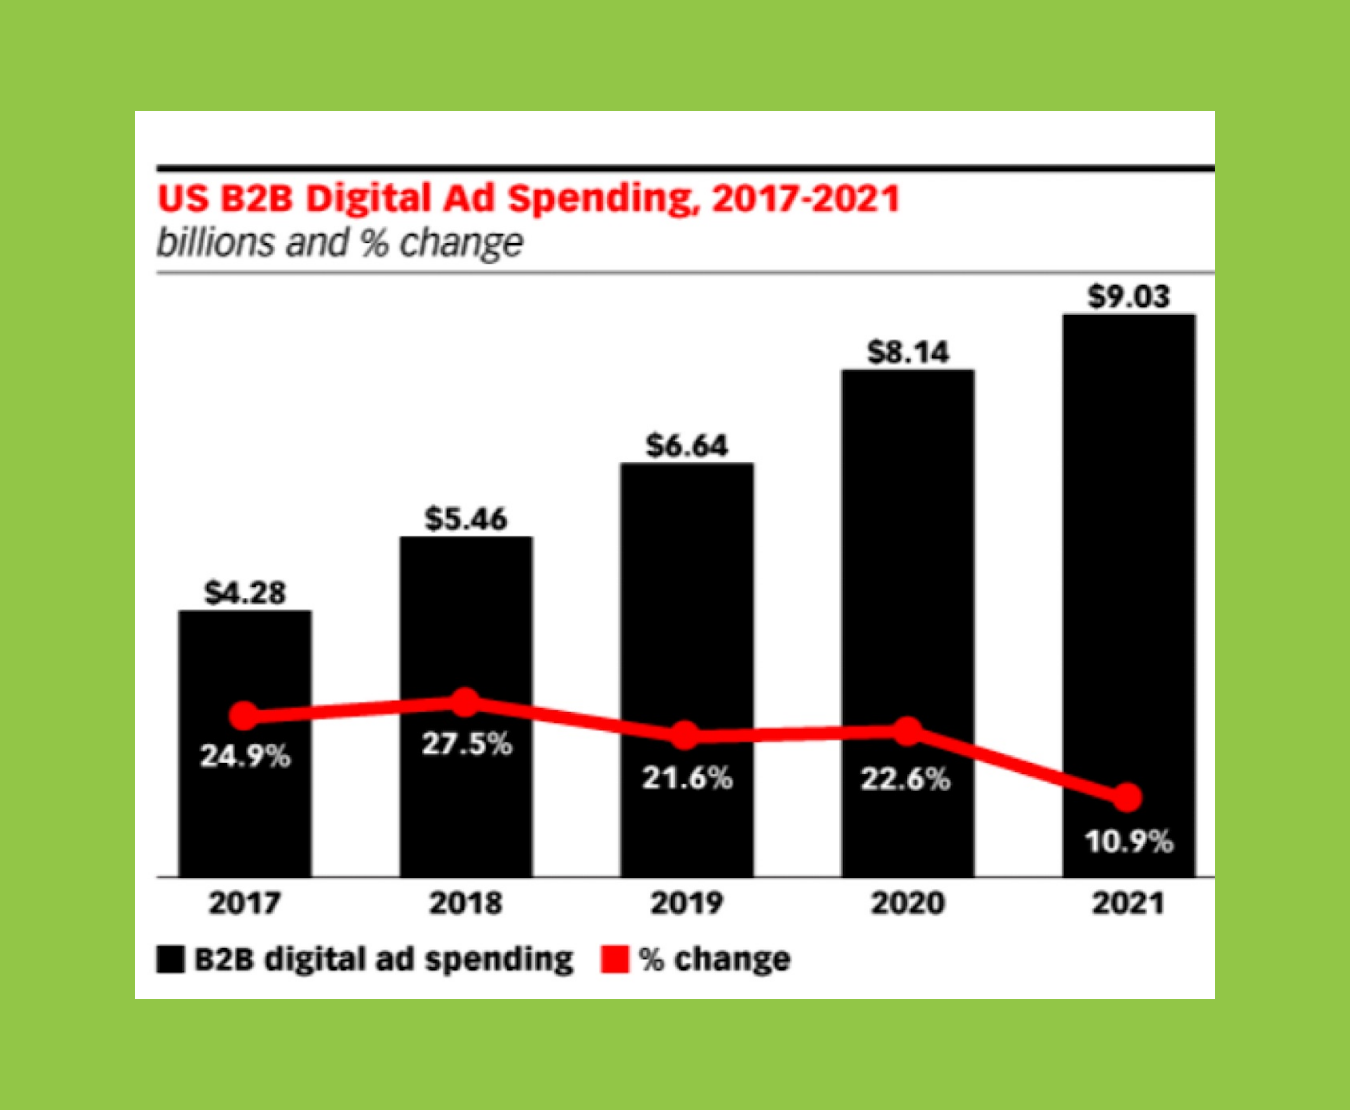 The graph shows that B2B Digital ad spending rose dramatically from 2017 to 2021, from $4.28 billion in 2017 to $9.03 billion in 2021